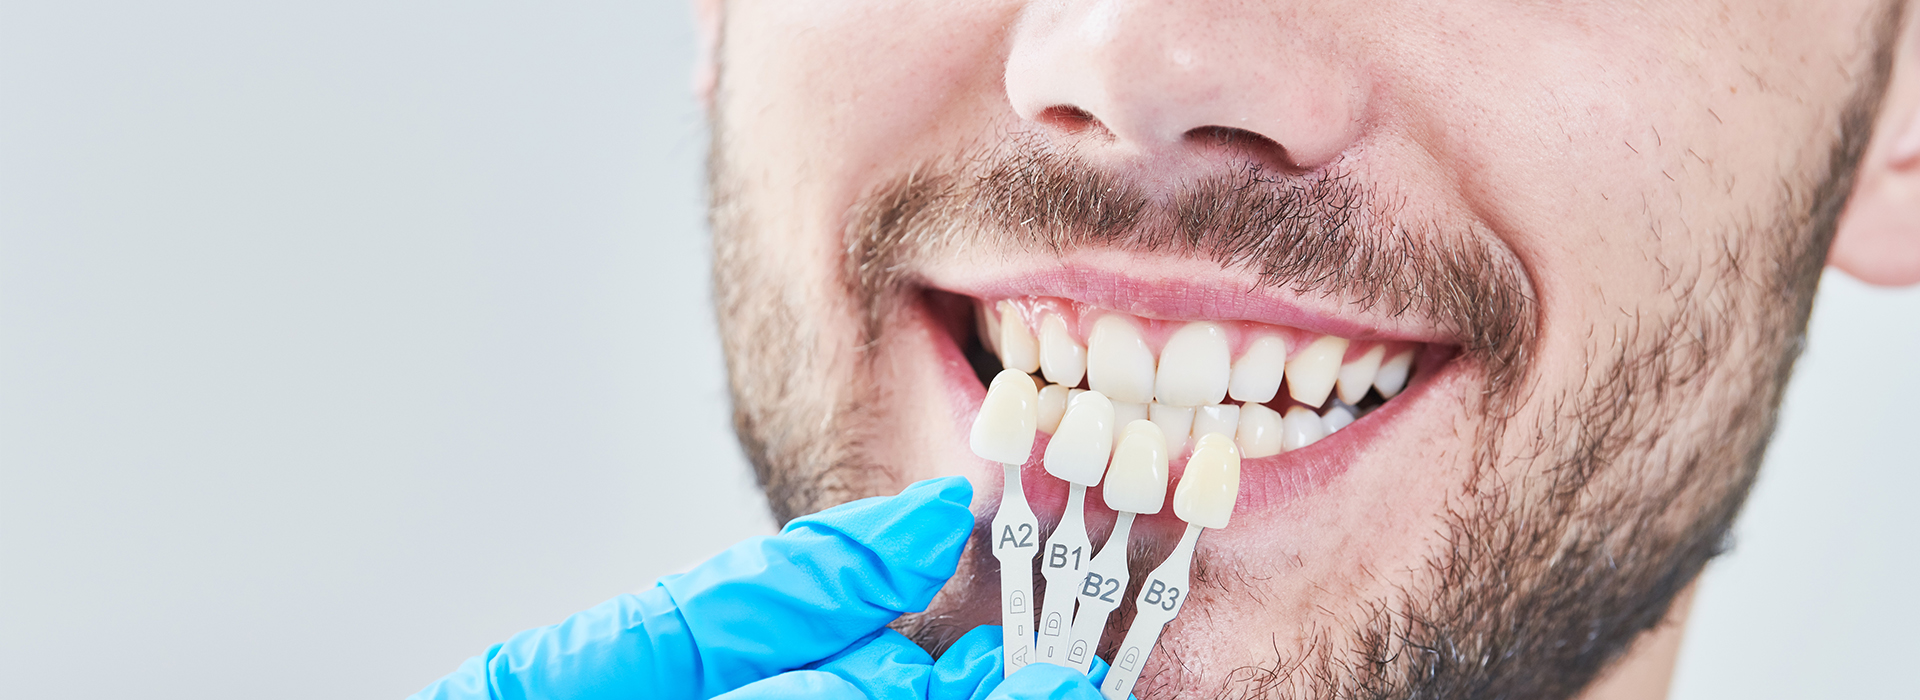 All About You Dental Group | Root Canals, Dentures and Dental Sealants